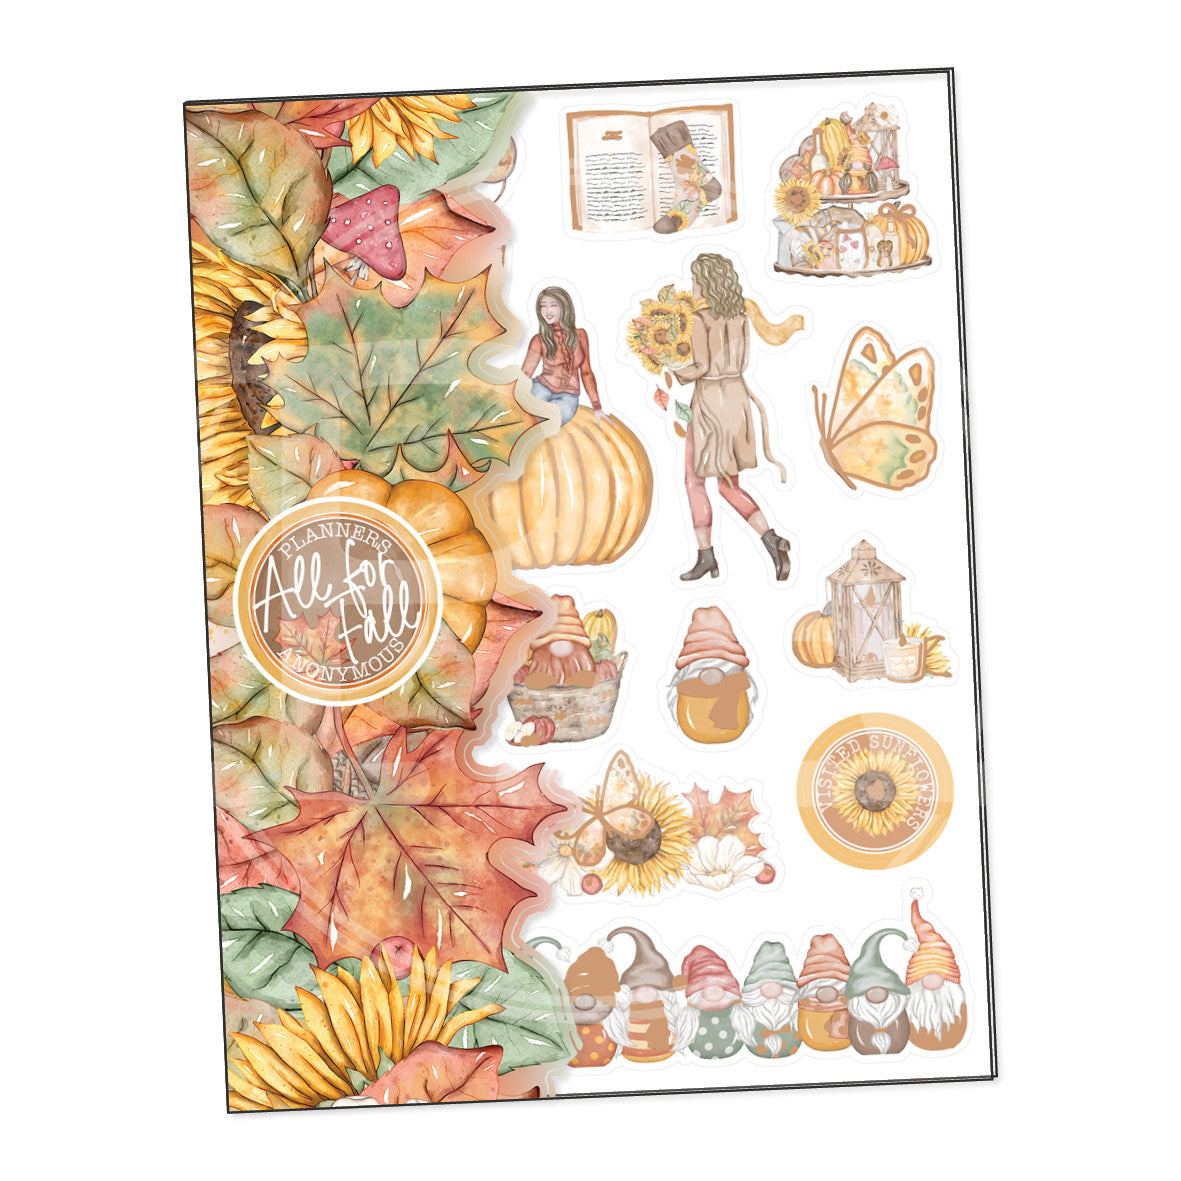 All for Fall planner sticker book